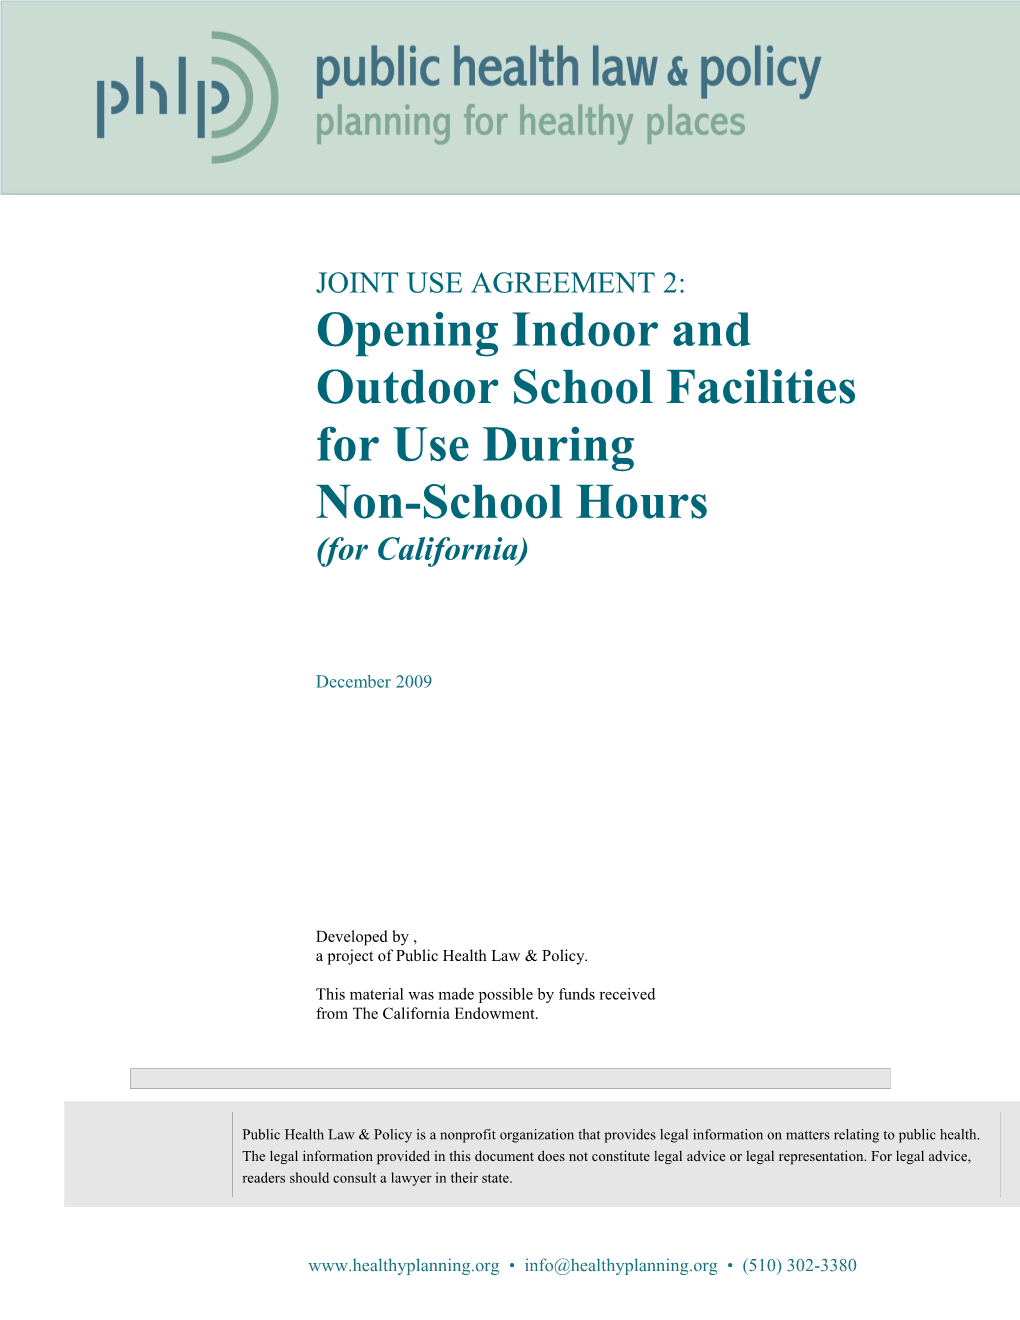 Outdoor Schoolfacilities for Use During